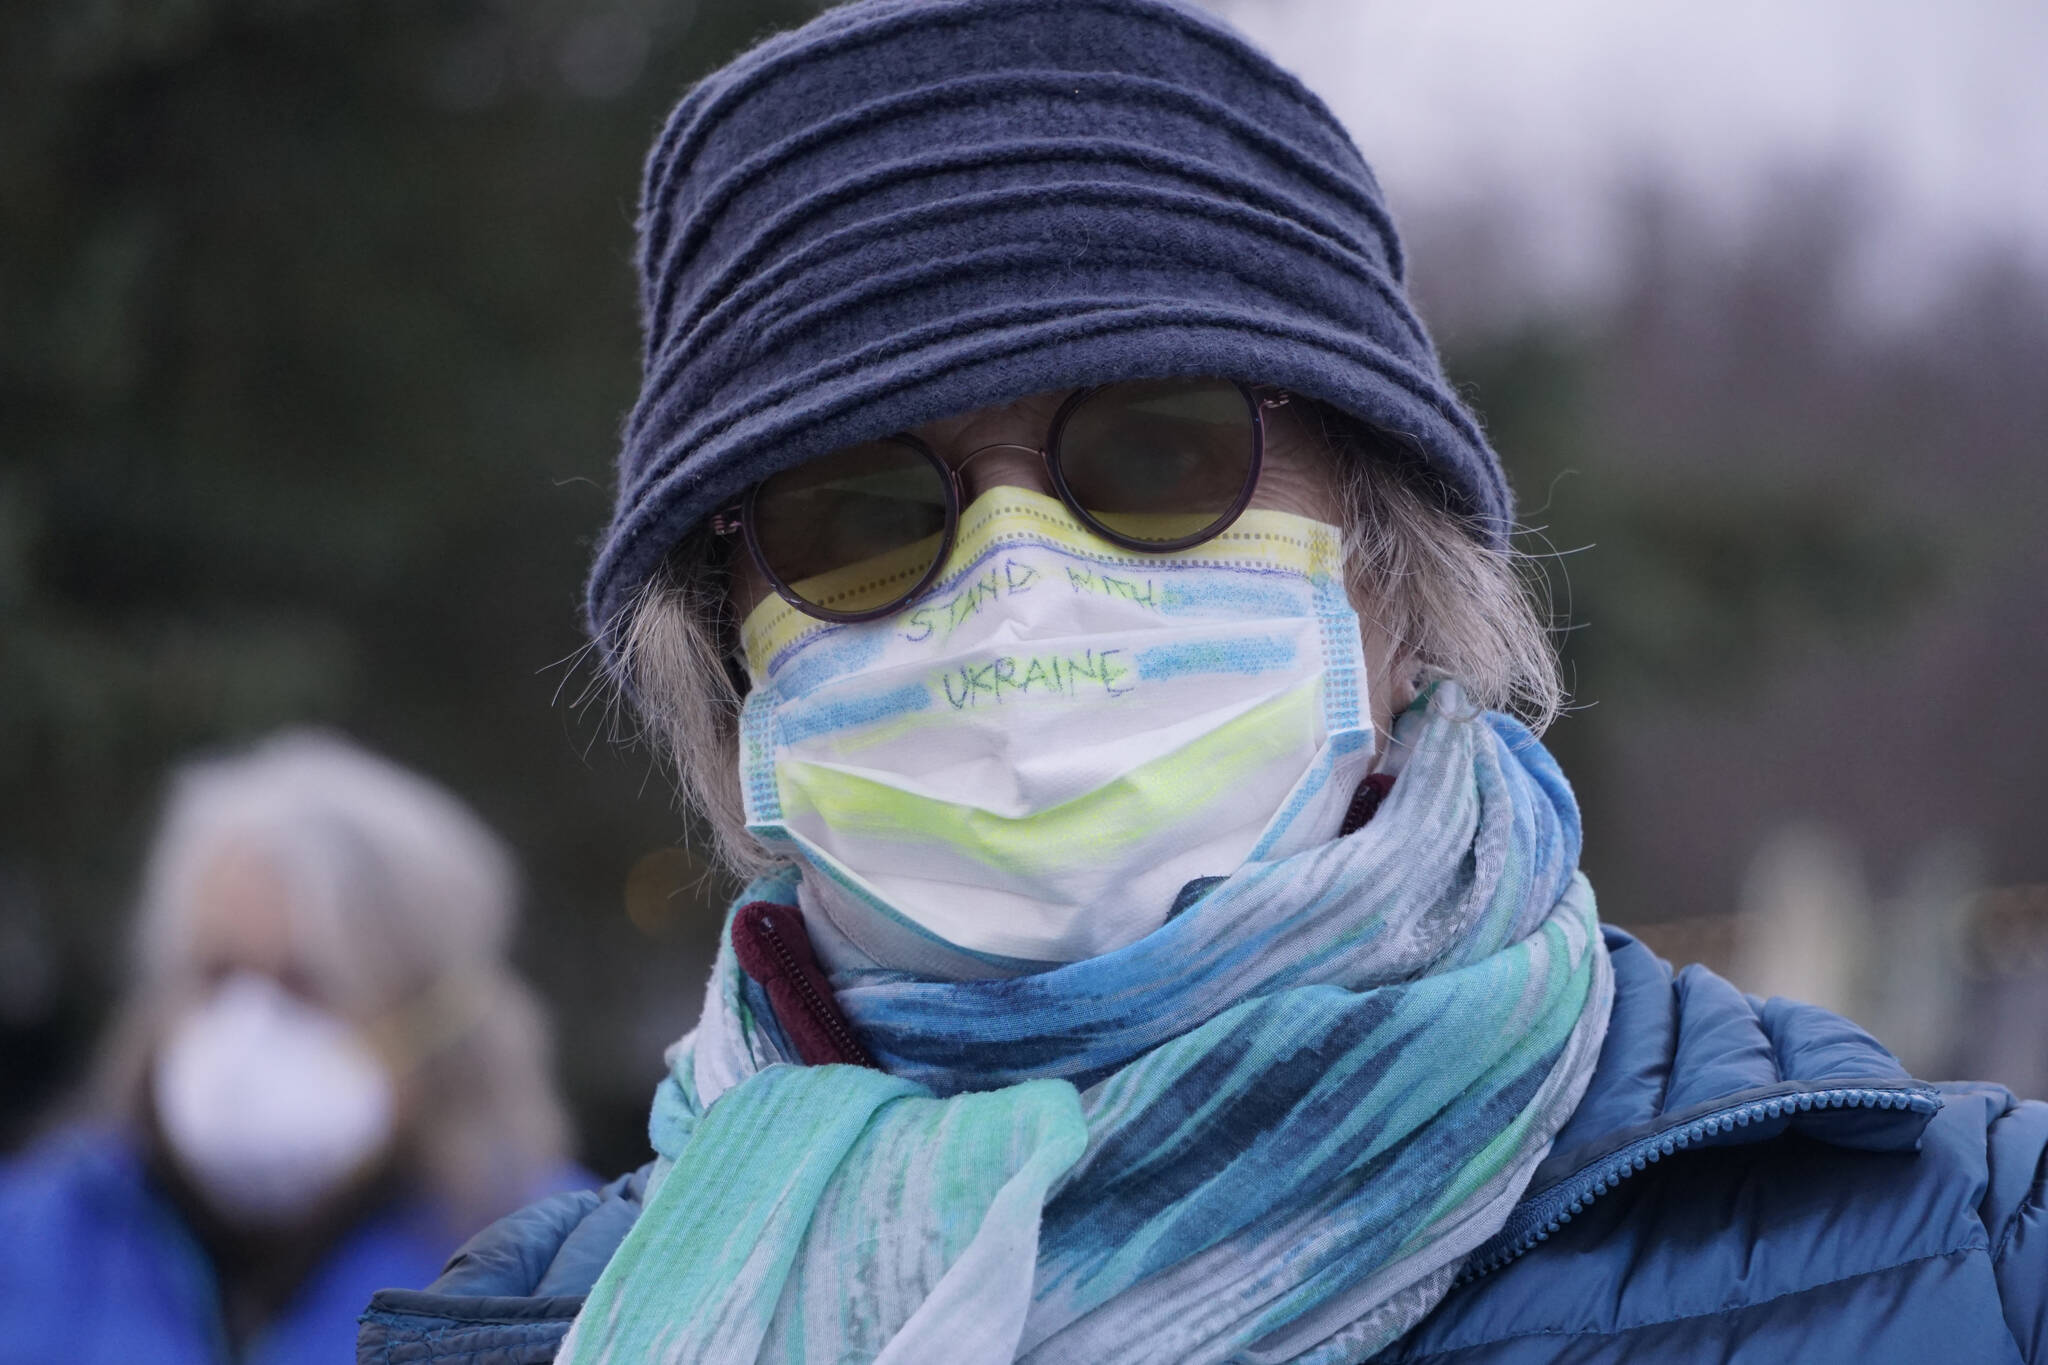 Susan Cushing wears a facemask saying “Stand With Ukraine” at a demonstration in support of Ukraine on Thursday, March 3, 2022, at WKFL Park in Homer, Alaska. (Photo by Michael Armstrong/Homer News)